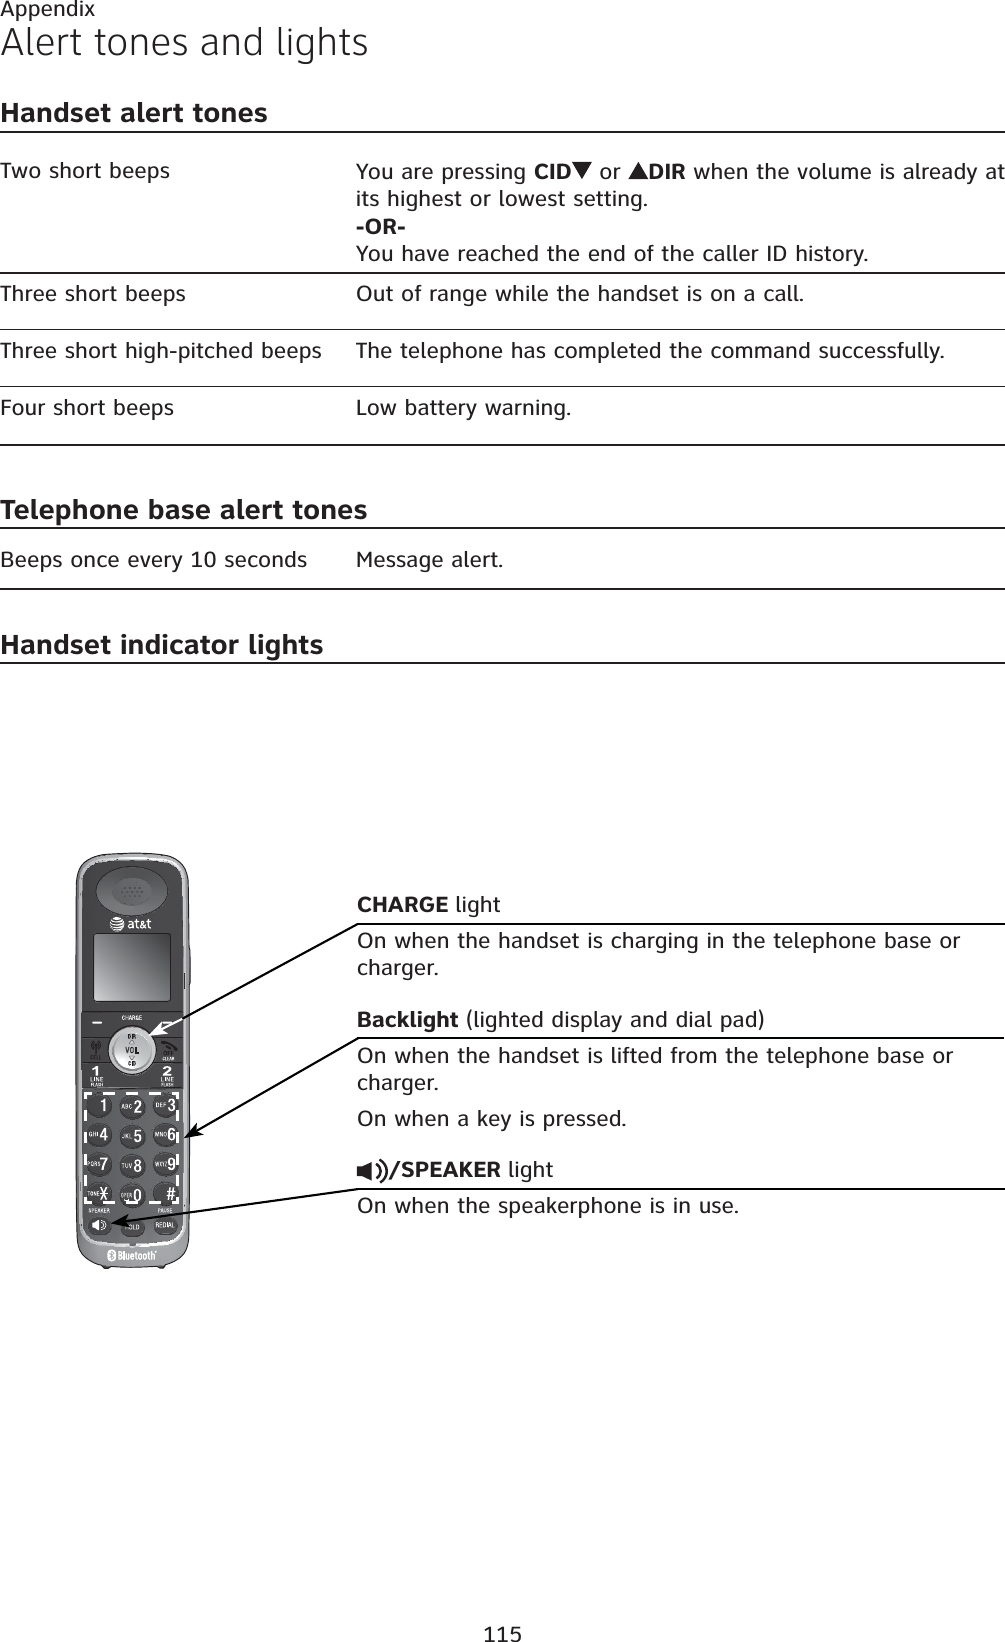 115AppendixAlert tones and lightsHandset alert tonesTwo short beeps You are pressing CID  or  DIR when the volume is already at its highest or lowest setting.-OR-You have reached the end of the caller ID history.Three short beeps Out of range while the handset is on a call.Three short high-pitched beeps The telephone has completed the command successfully.Four short beeps Low battery warning.Telephone base alert tonesBeeps once every 10 seconds Message alert.Handset indicator lightsCHARGE lightOn when the handset is charging in the telephone base or charger.Backlight (lighted display and dial pad)On when the handset is lifted from the telephone base or charger.On when a key is pressed./SPEAKER lightOn when the speakerphone is in use.